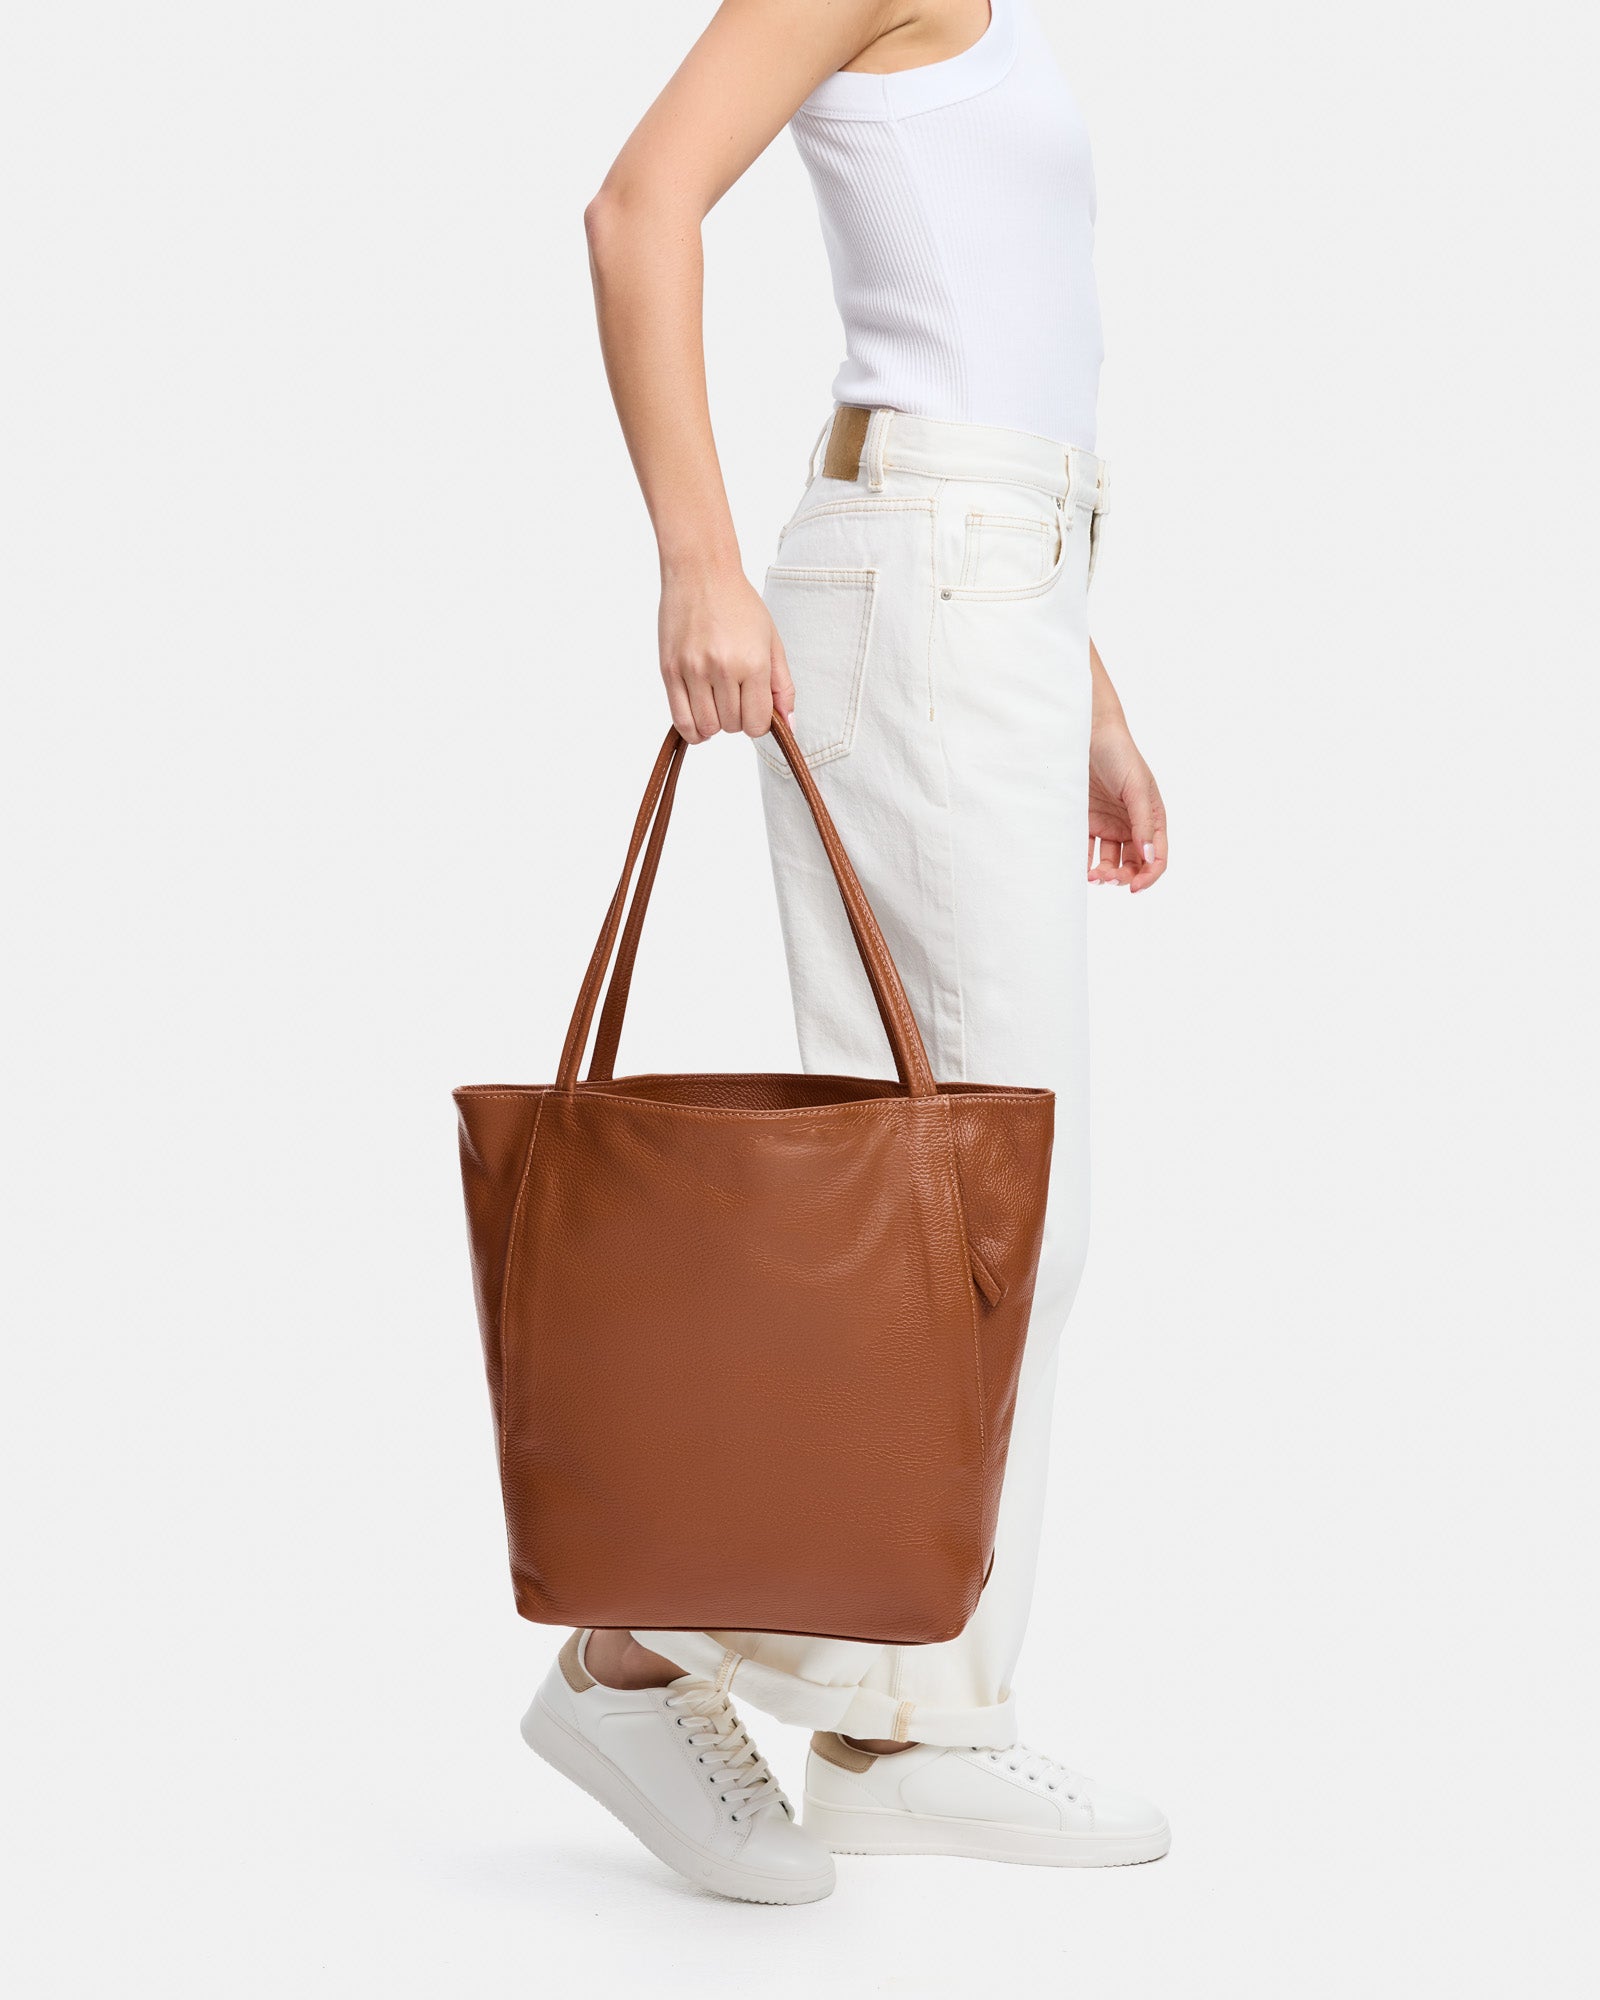 Buy Personalized Full Grain Leather Tote Bag With Crossbody Strap  Handcrafted and Timeless Gift for Her Online in India - Etsy